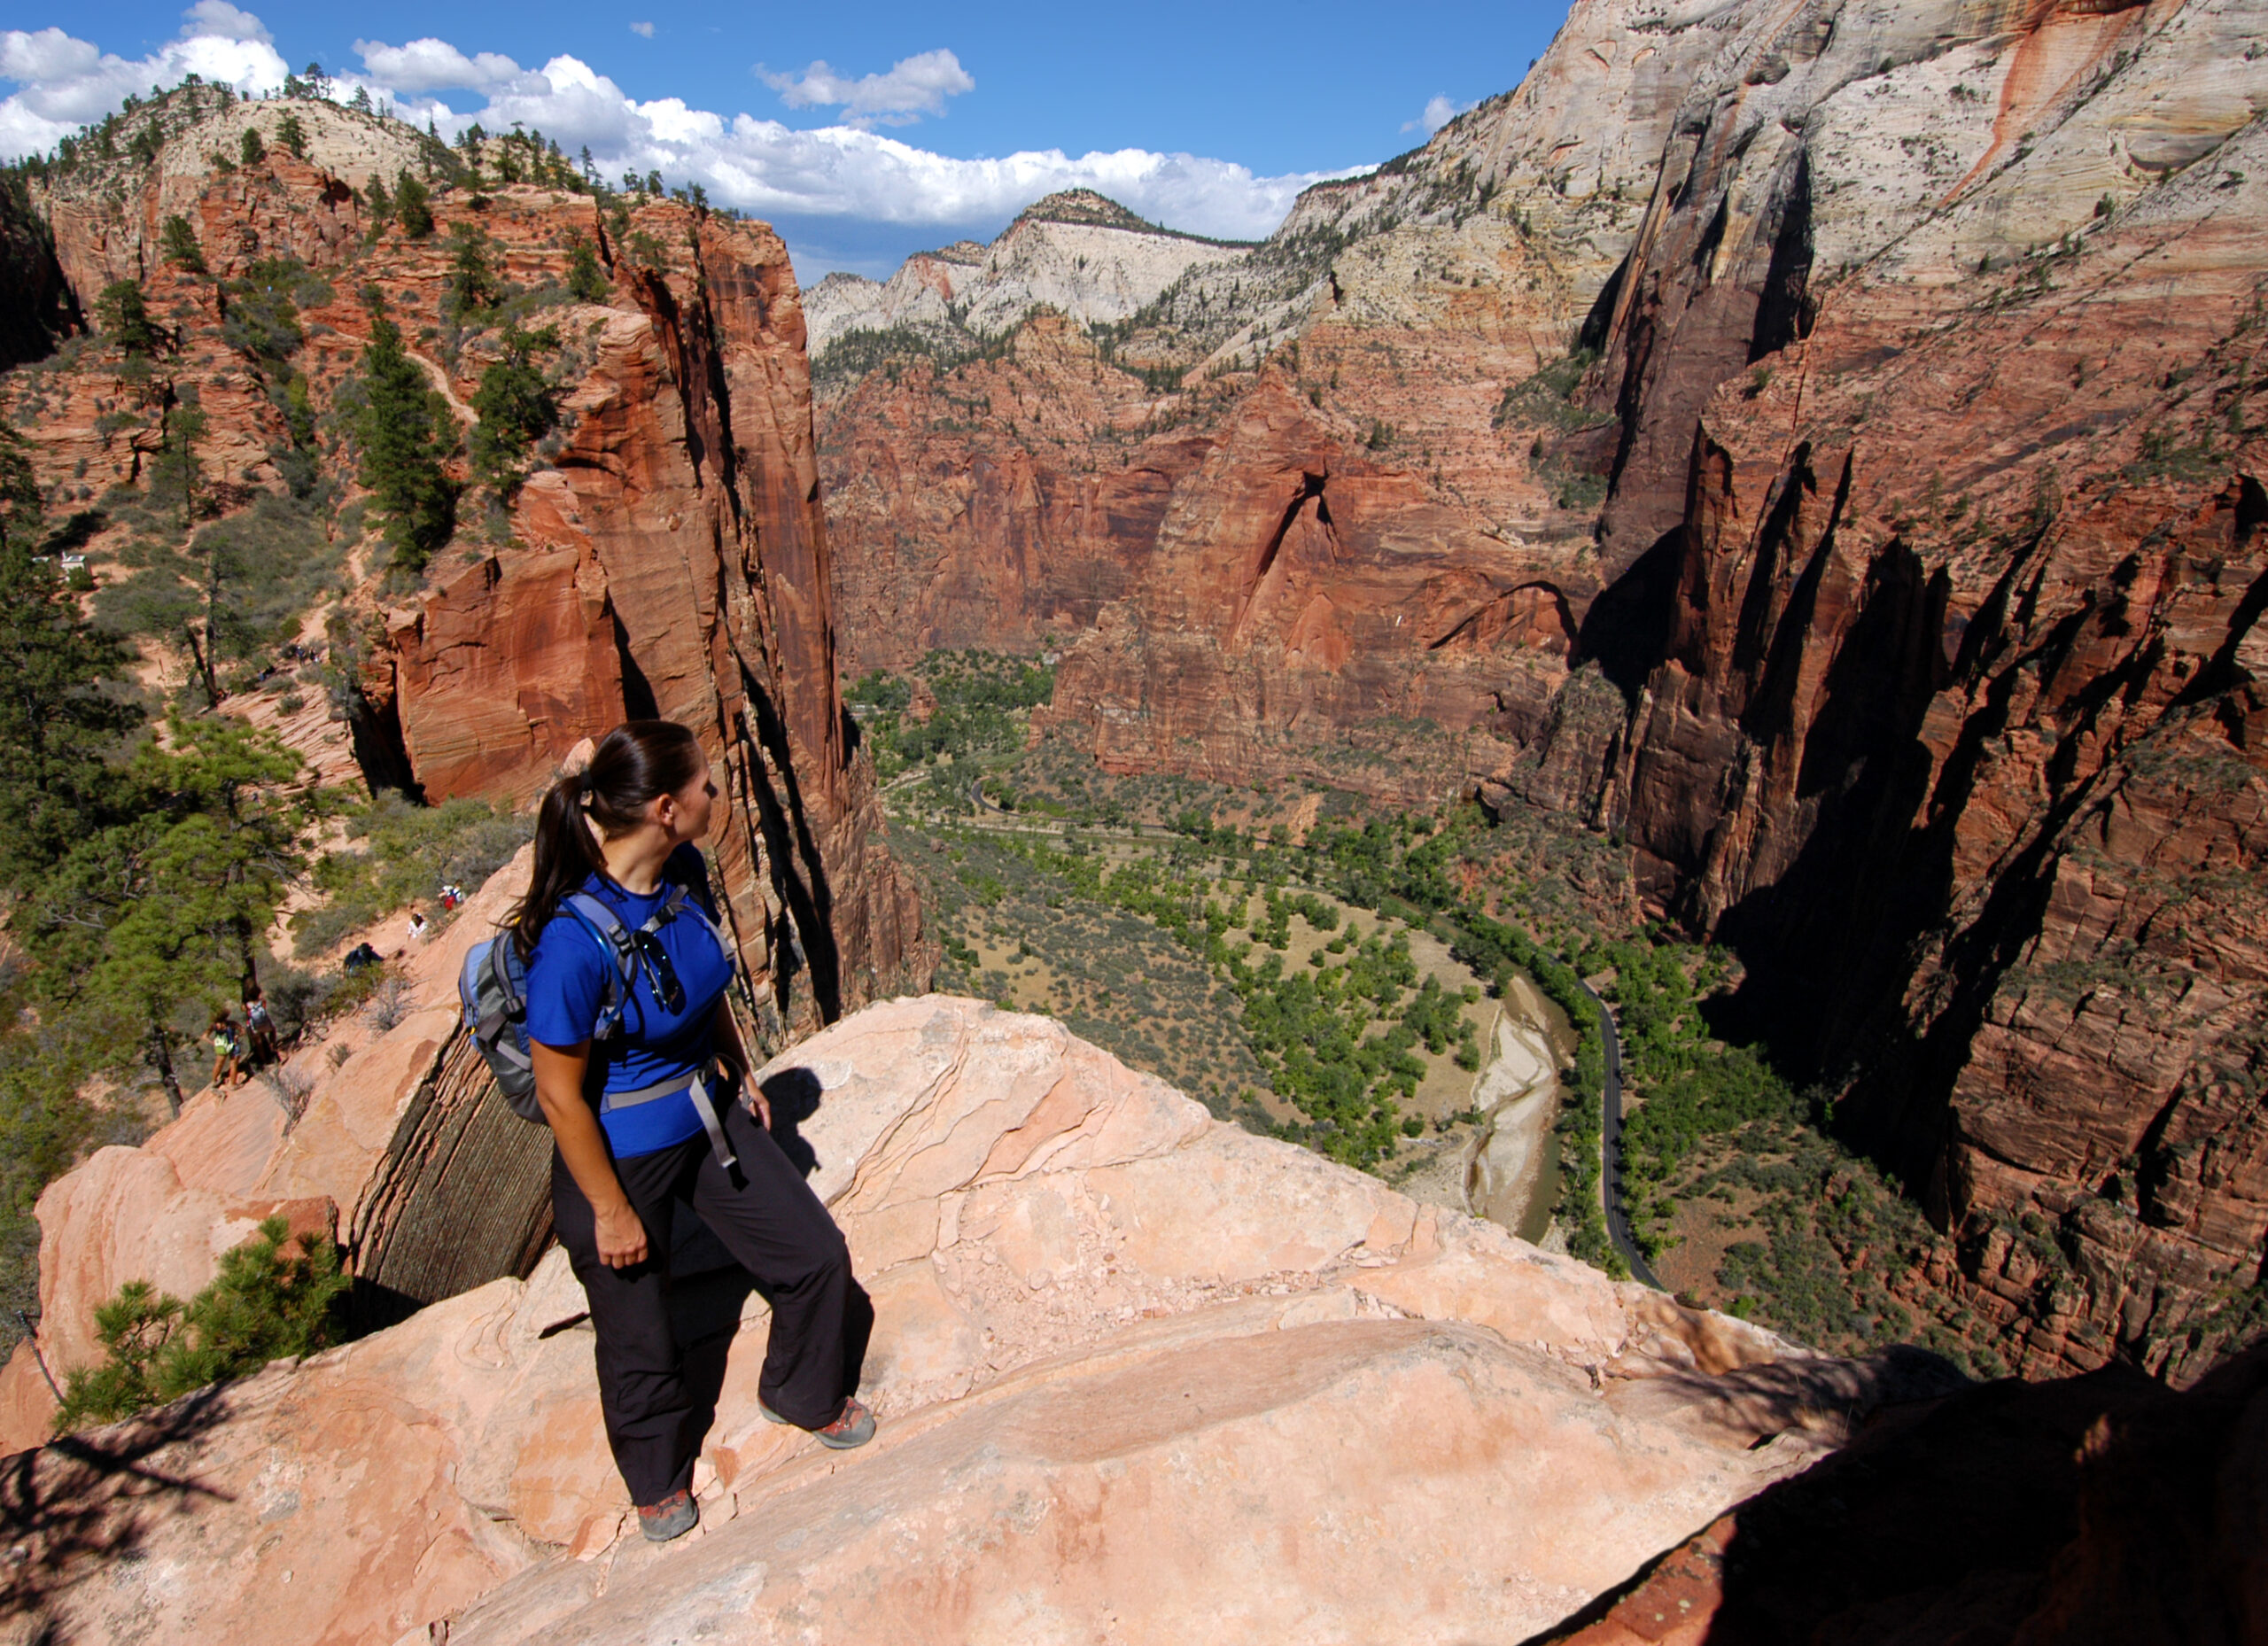 Zion park officials detail lottery to hike Angels Landing